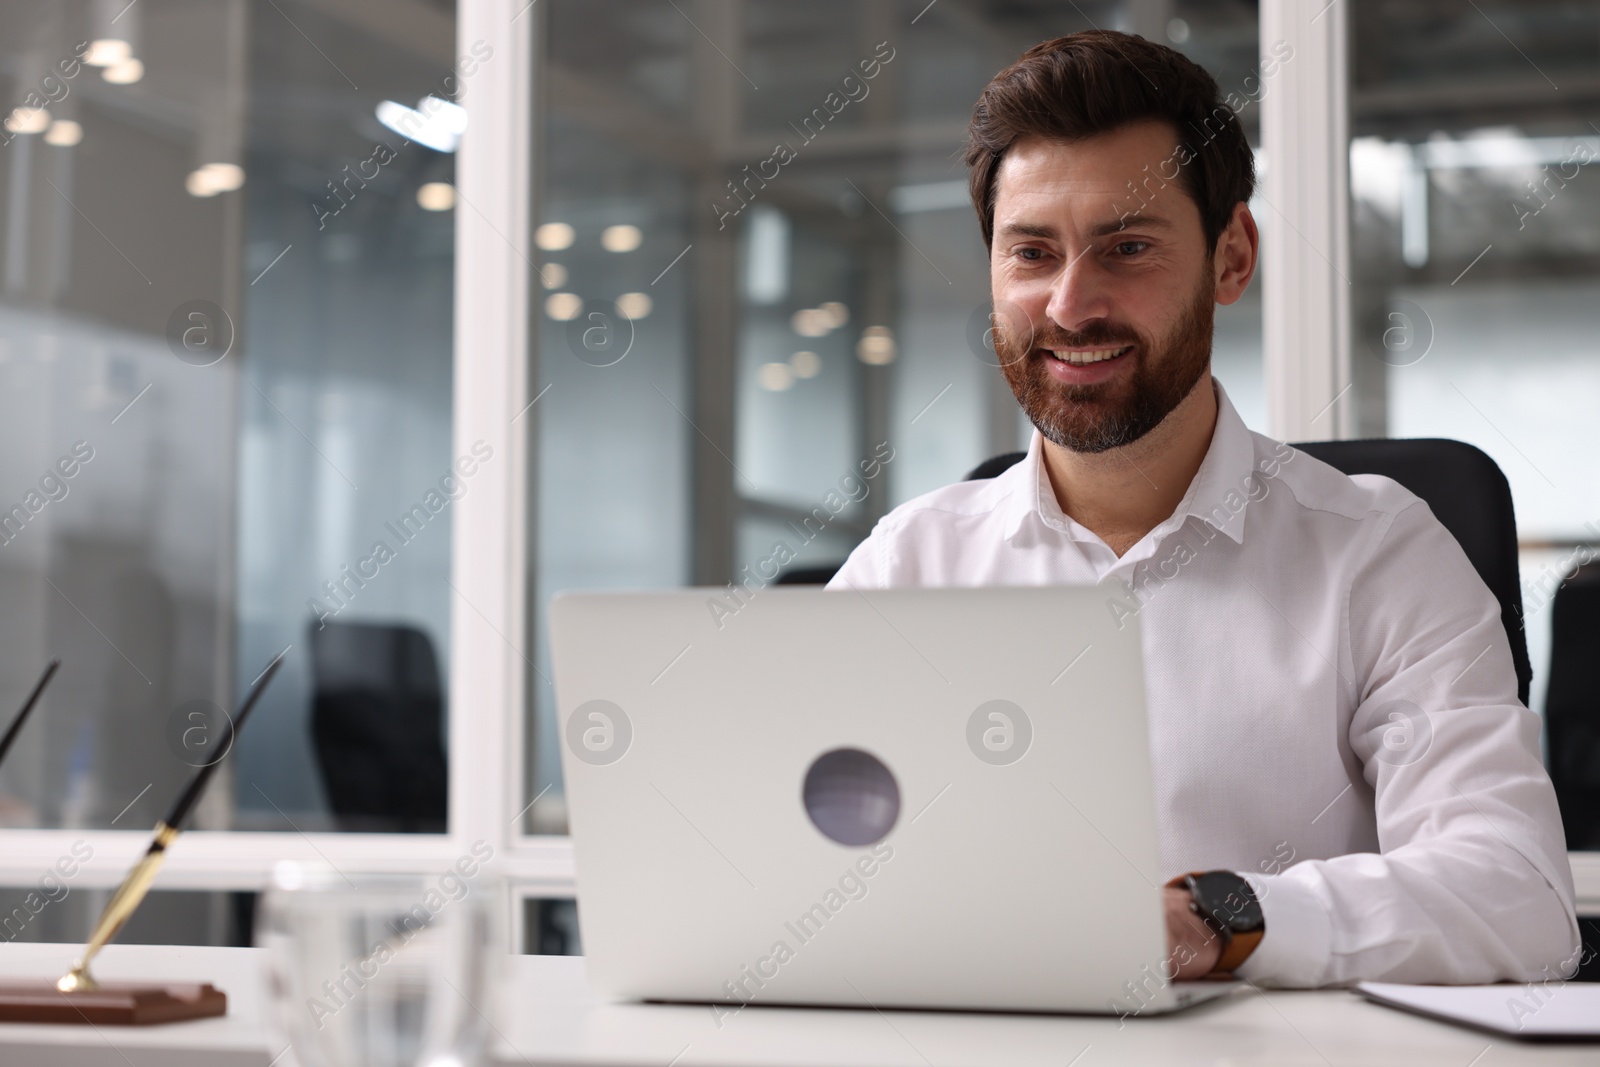 Photo of Portrait of smiling man working with laptop in office, space for text. Lawyer, businessman, accountant or manager